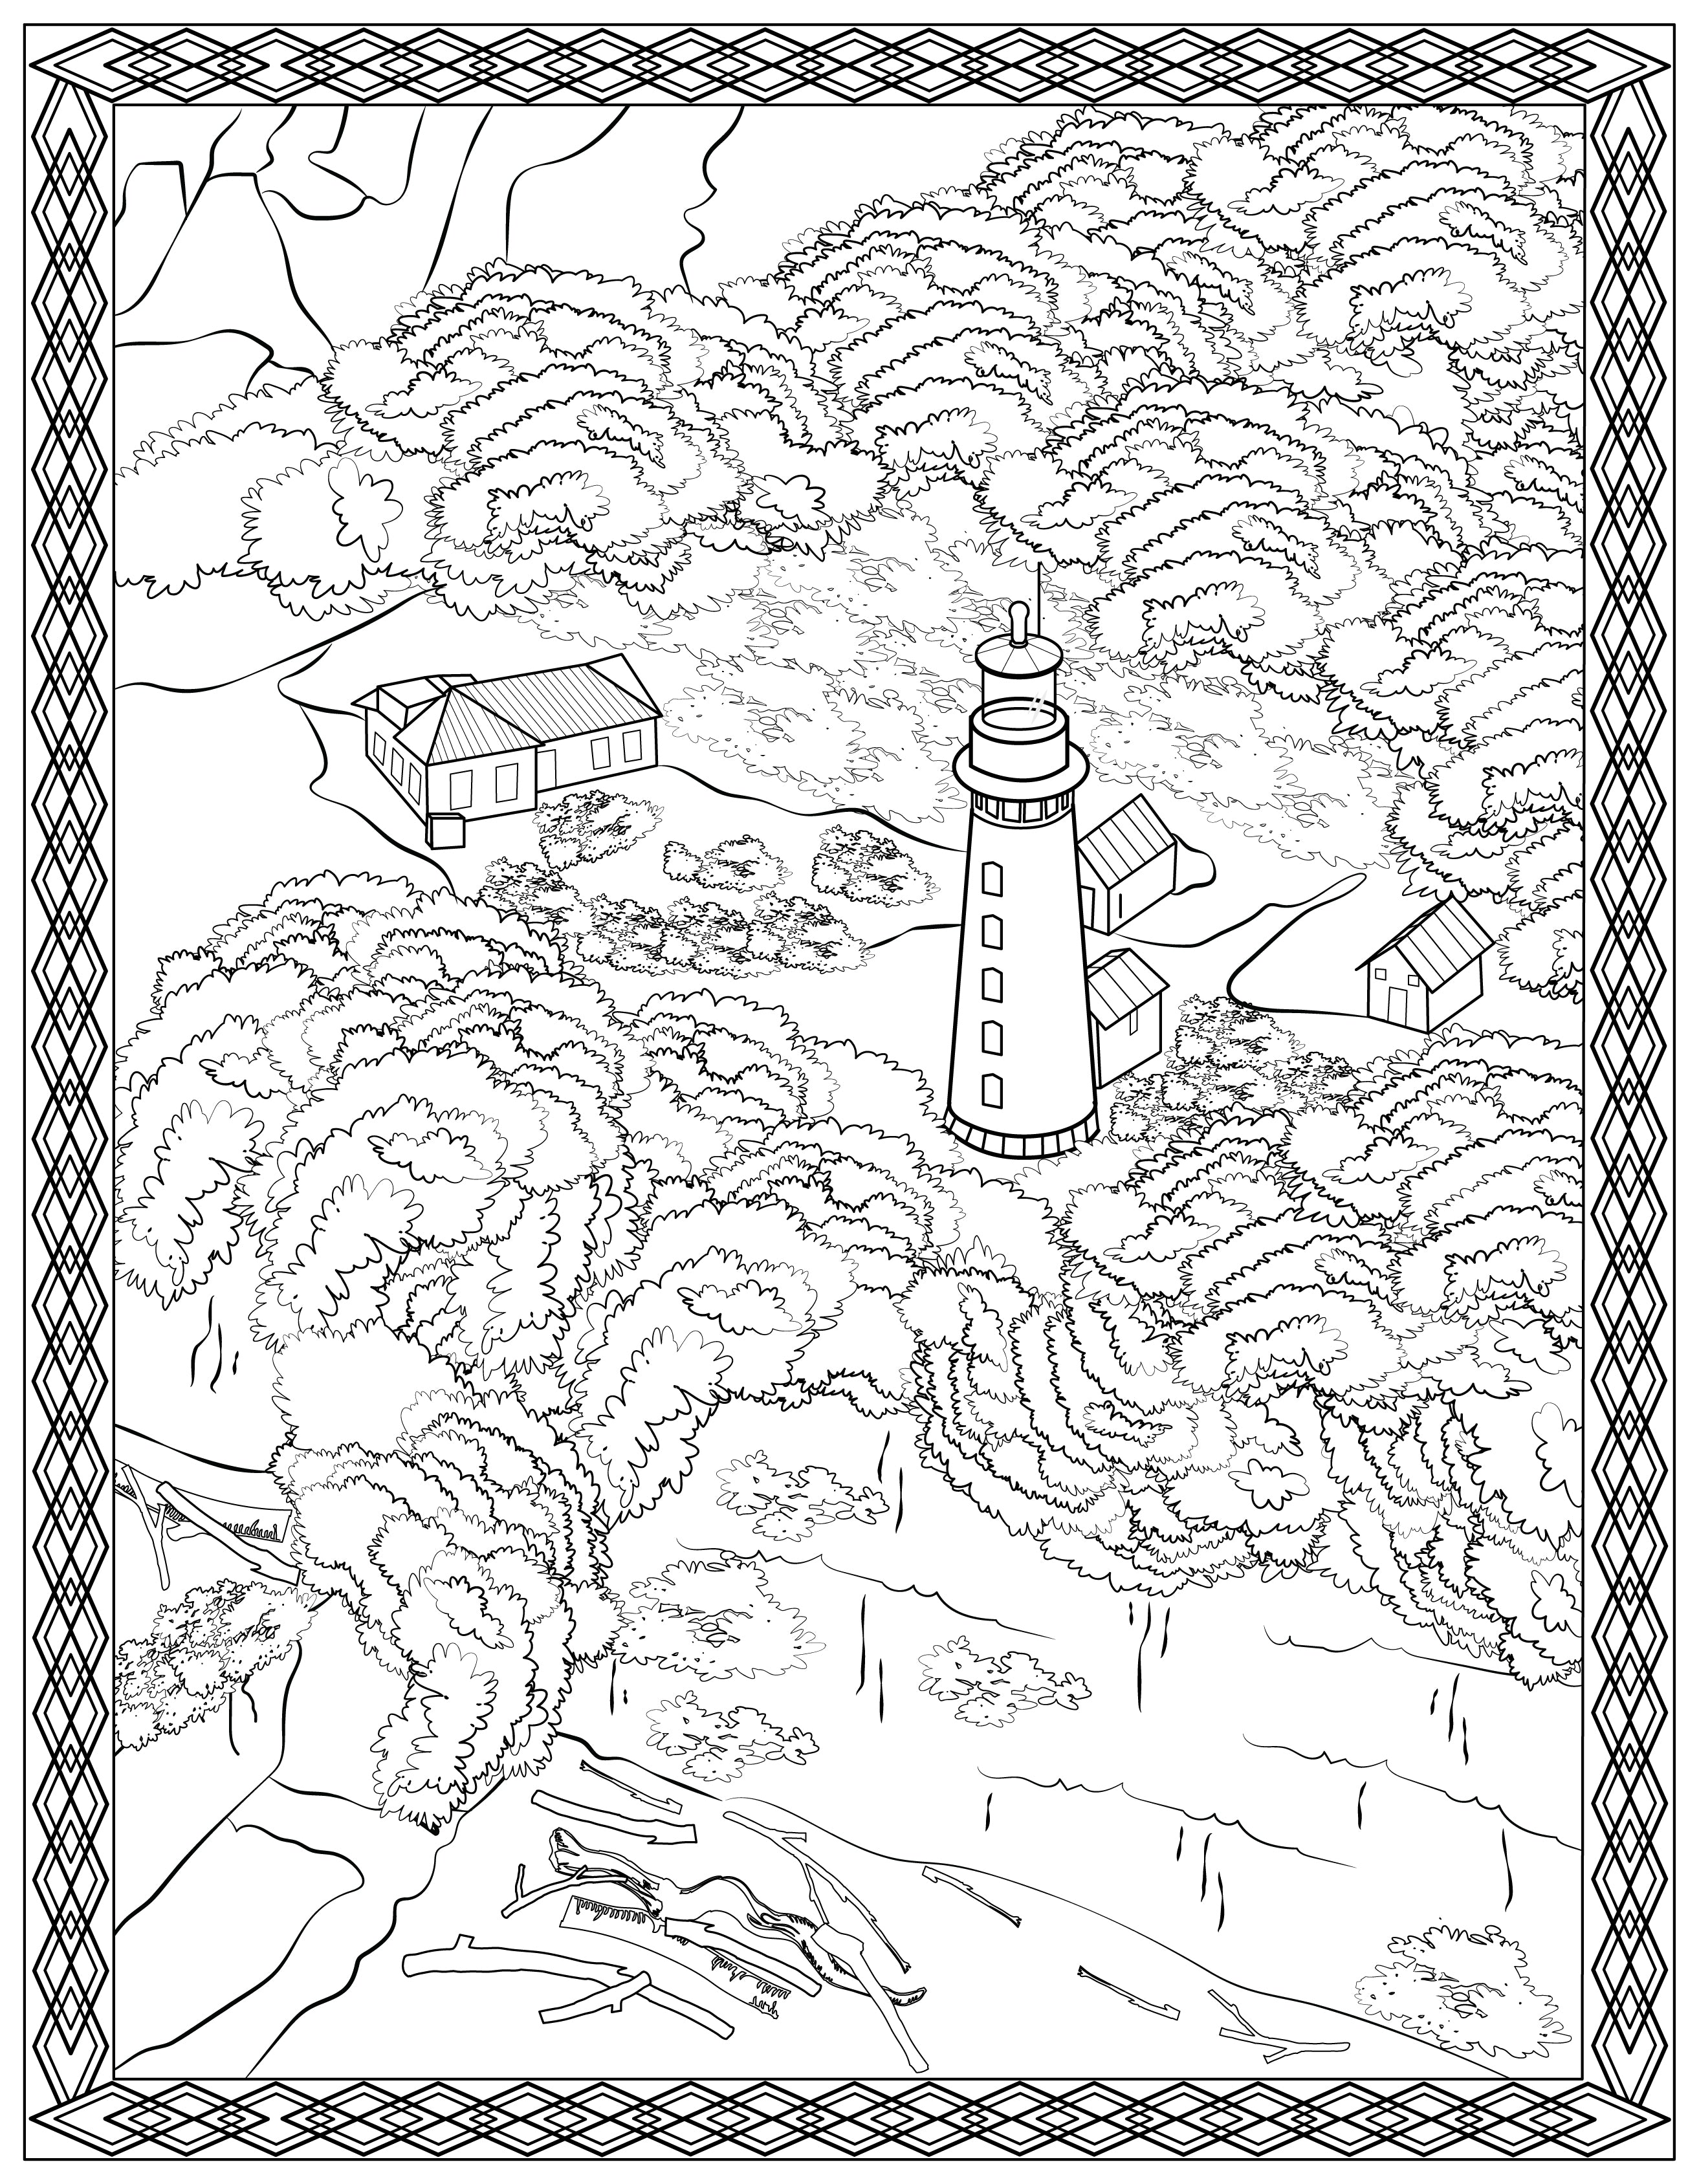 Single Coloring Book Page - Destruction Island Lighthouse, Washington - Digital Print-from-Home